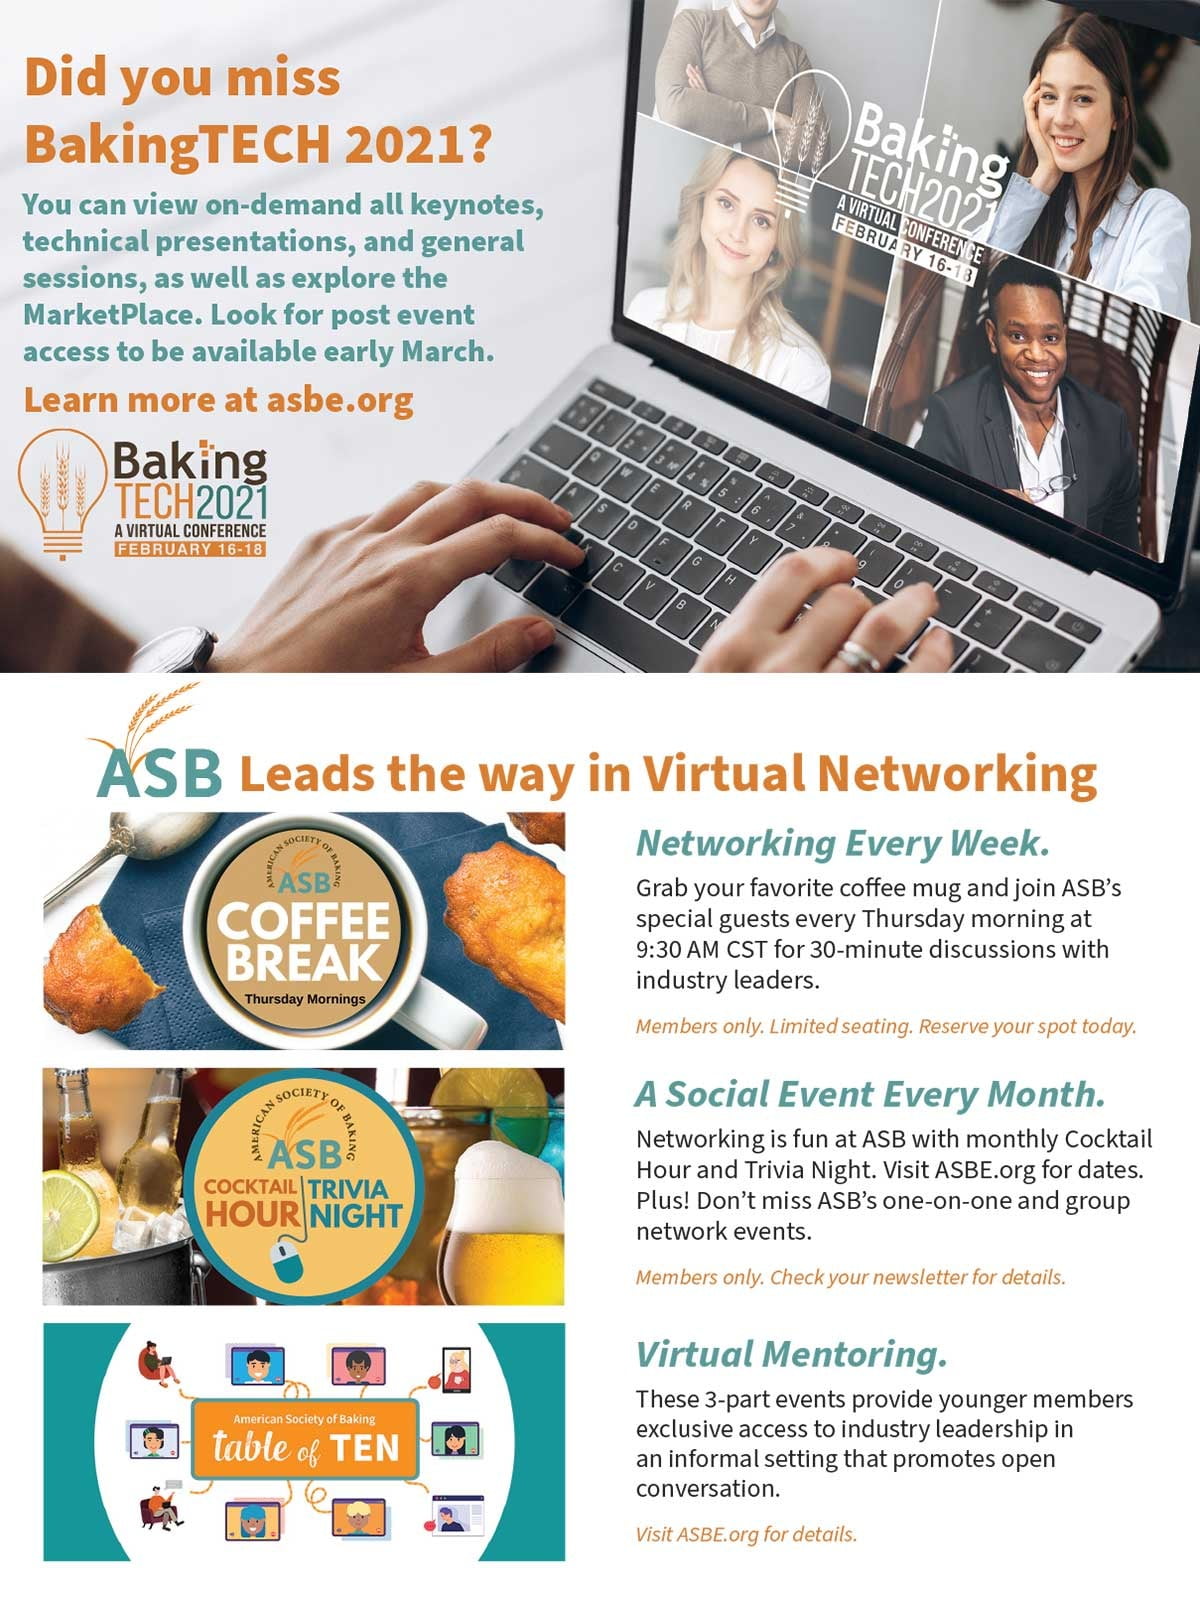 Laptop, Screen, Hands, Headshots, Conference logo, Virtual networking